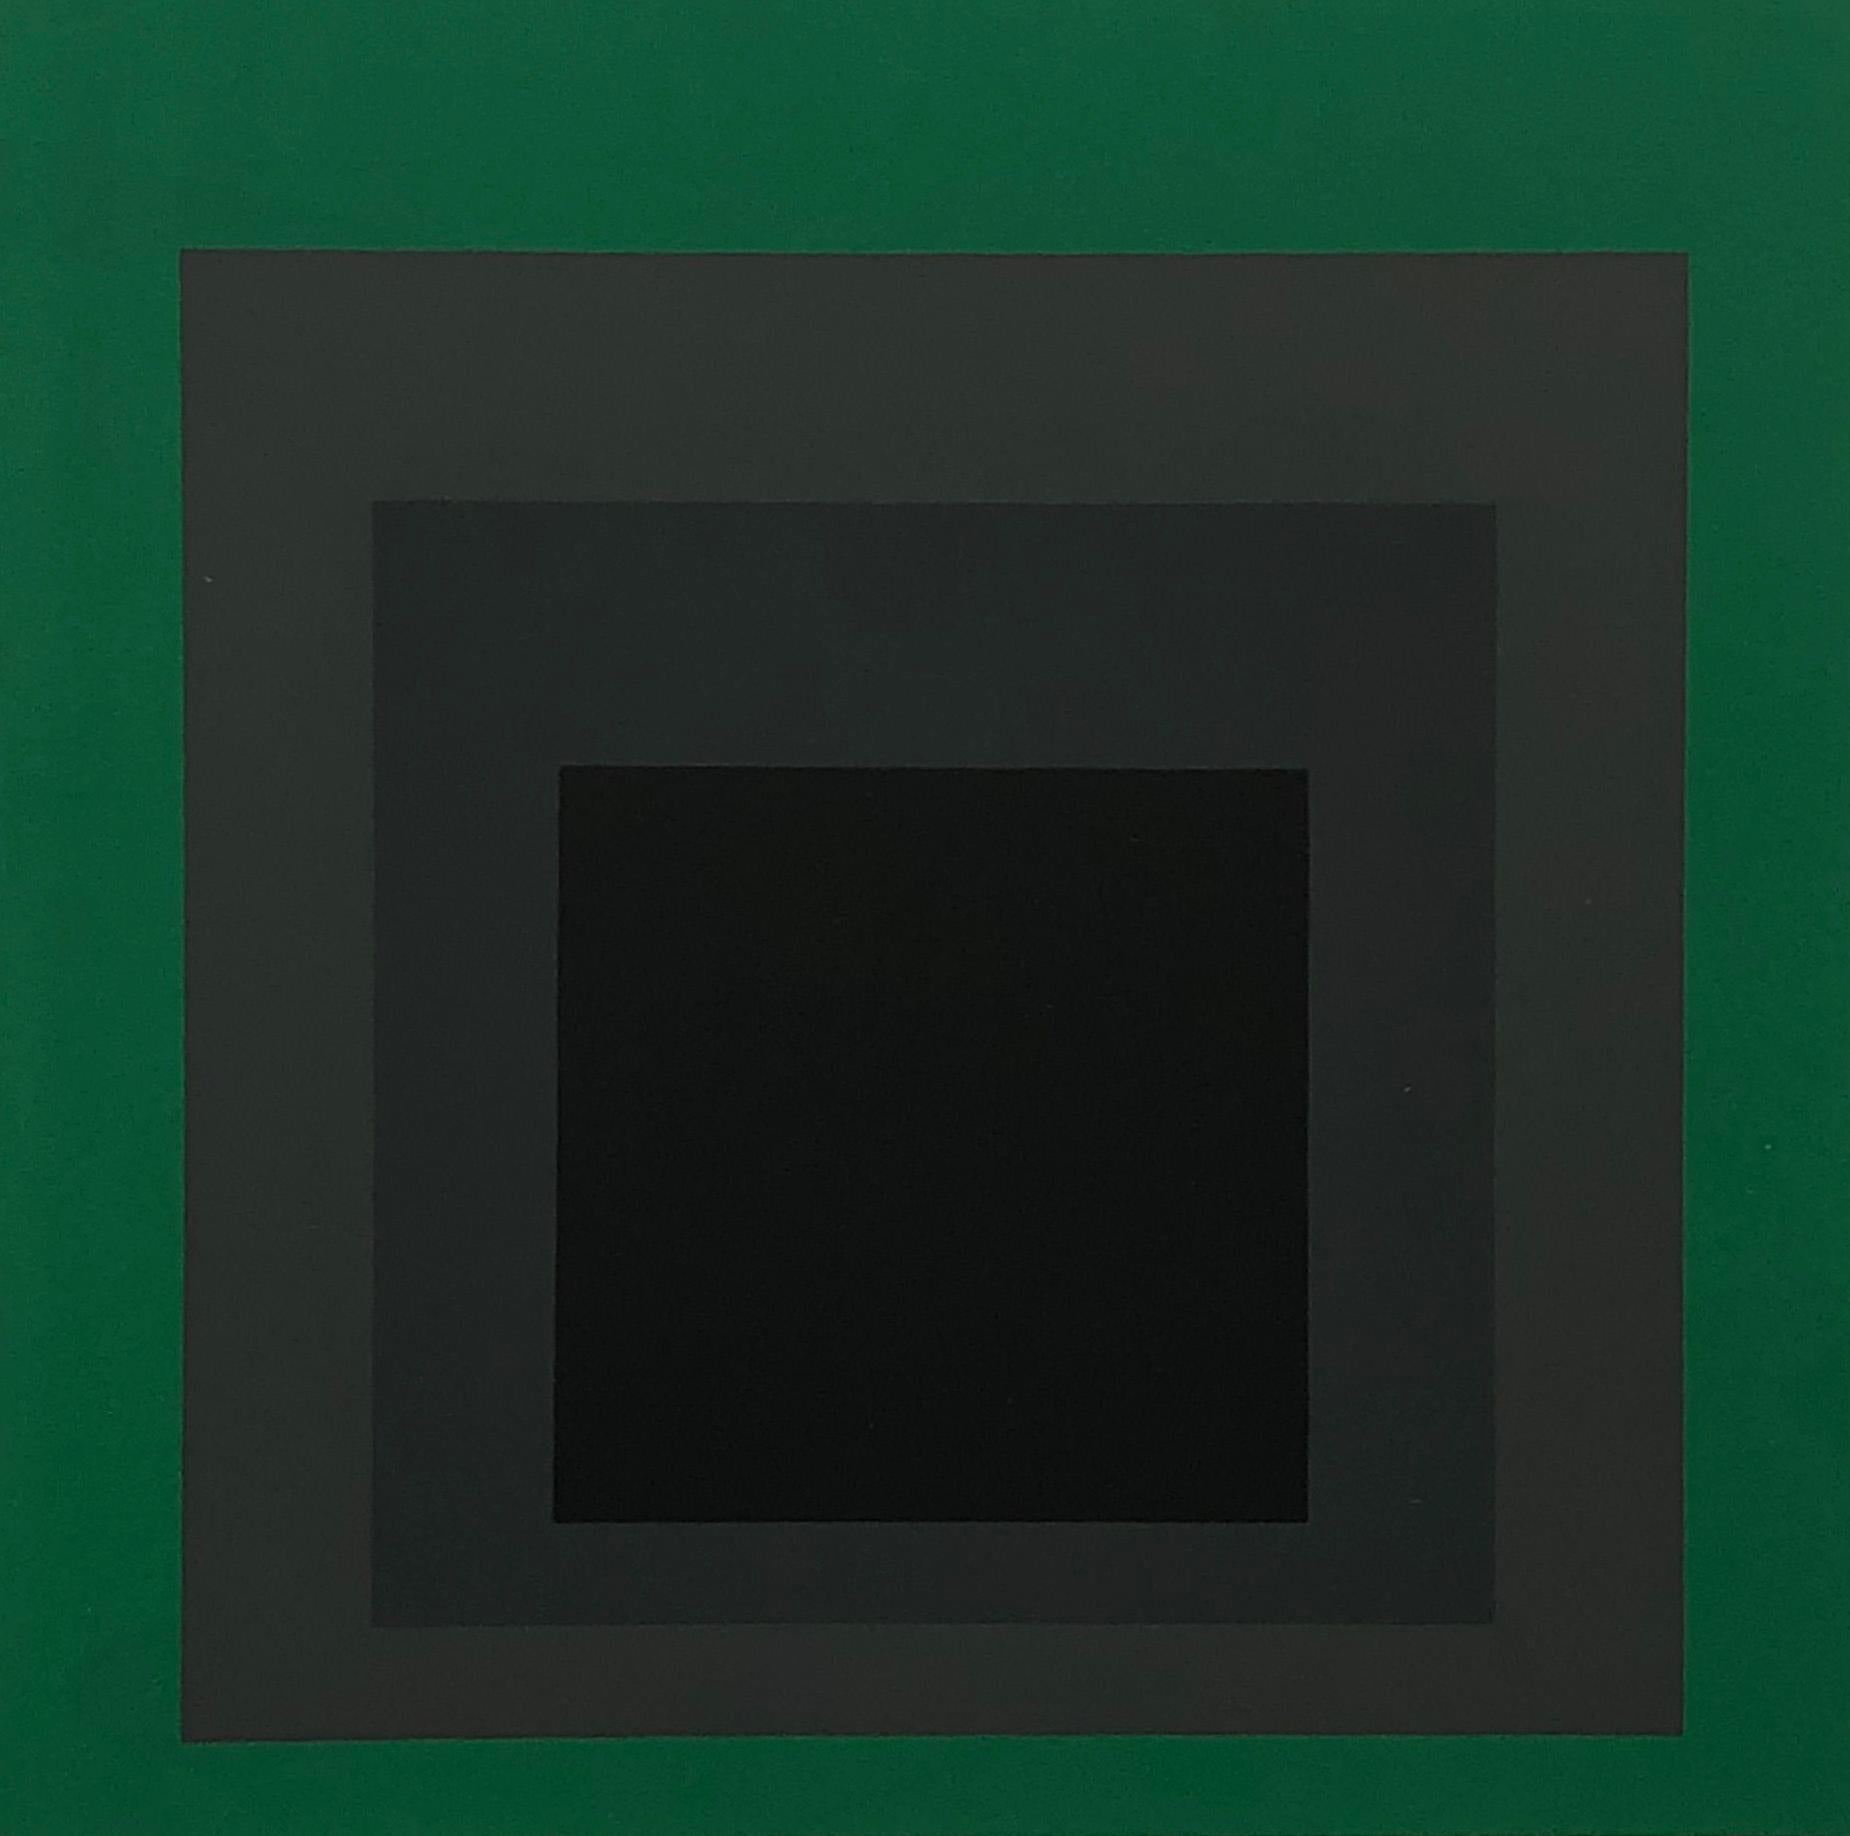 (after) Josef Albers Abstract Print - Josef Albers Homage to the Square 1977 (Josef Albers prints) 